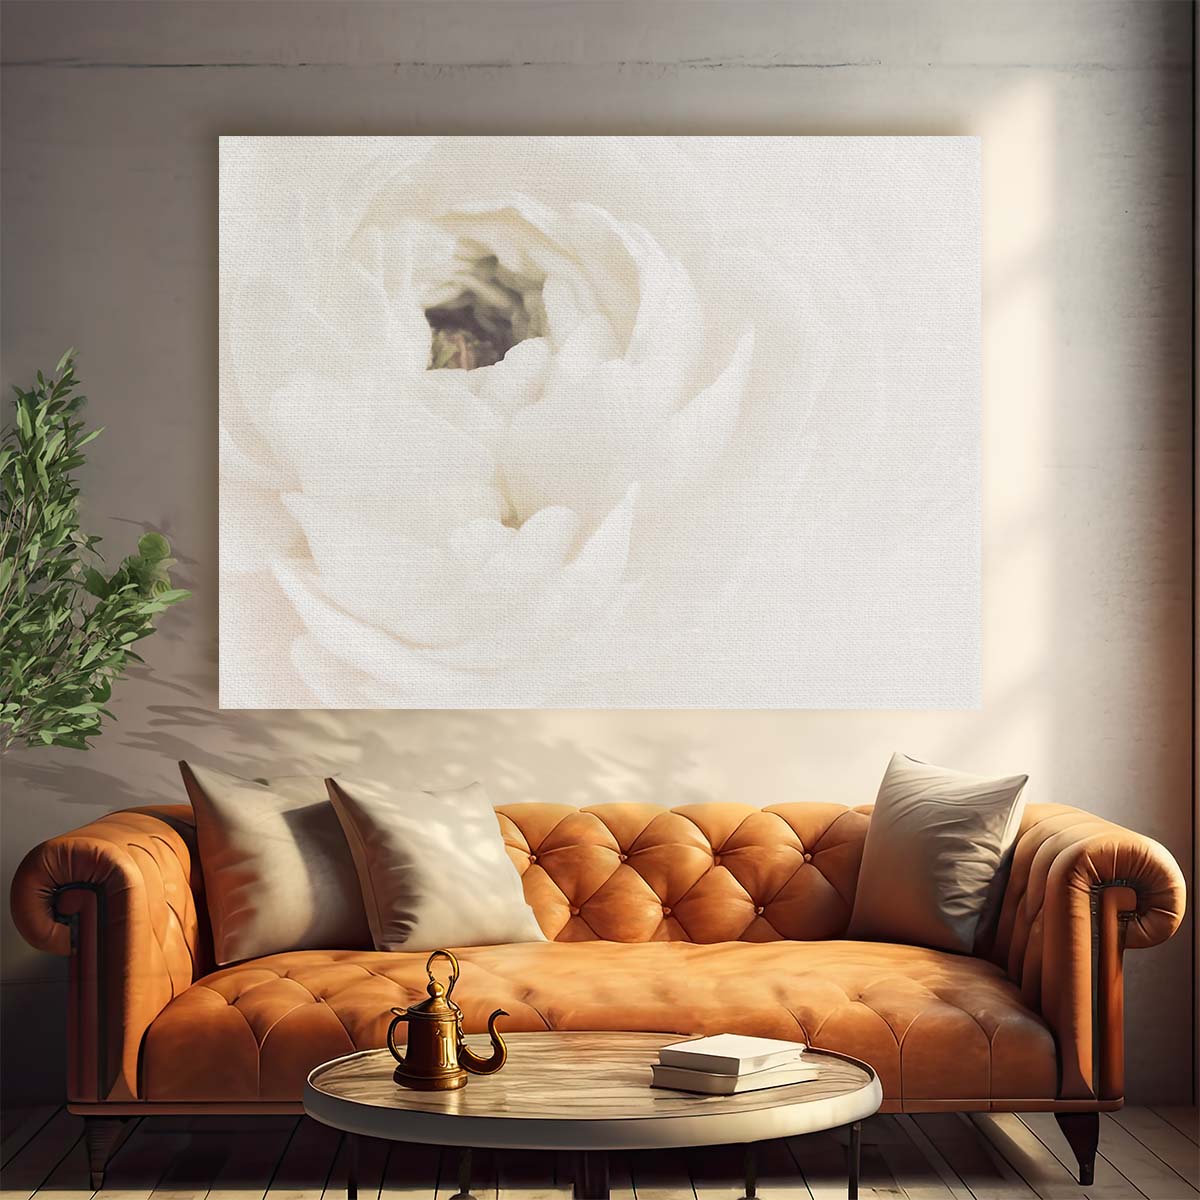 Vintage Peony Blossom Floral Wall Art by Luxuriance Designs. Made in USA.